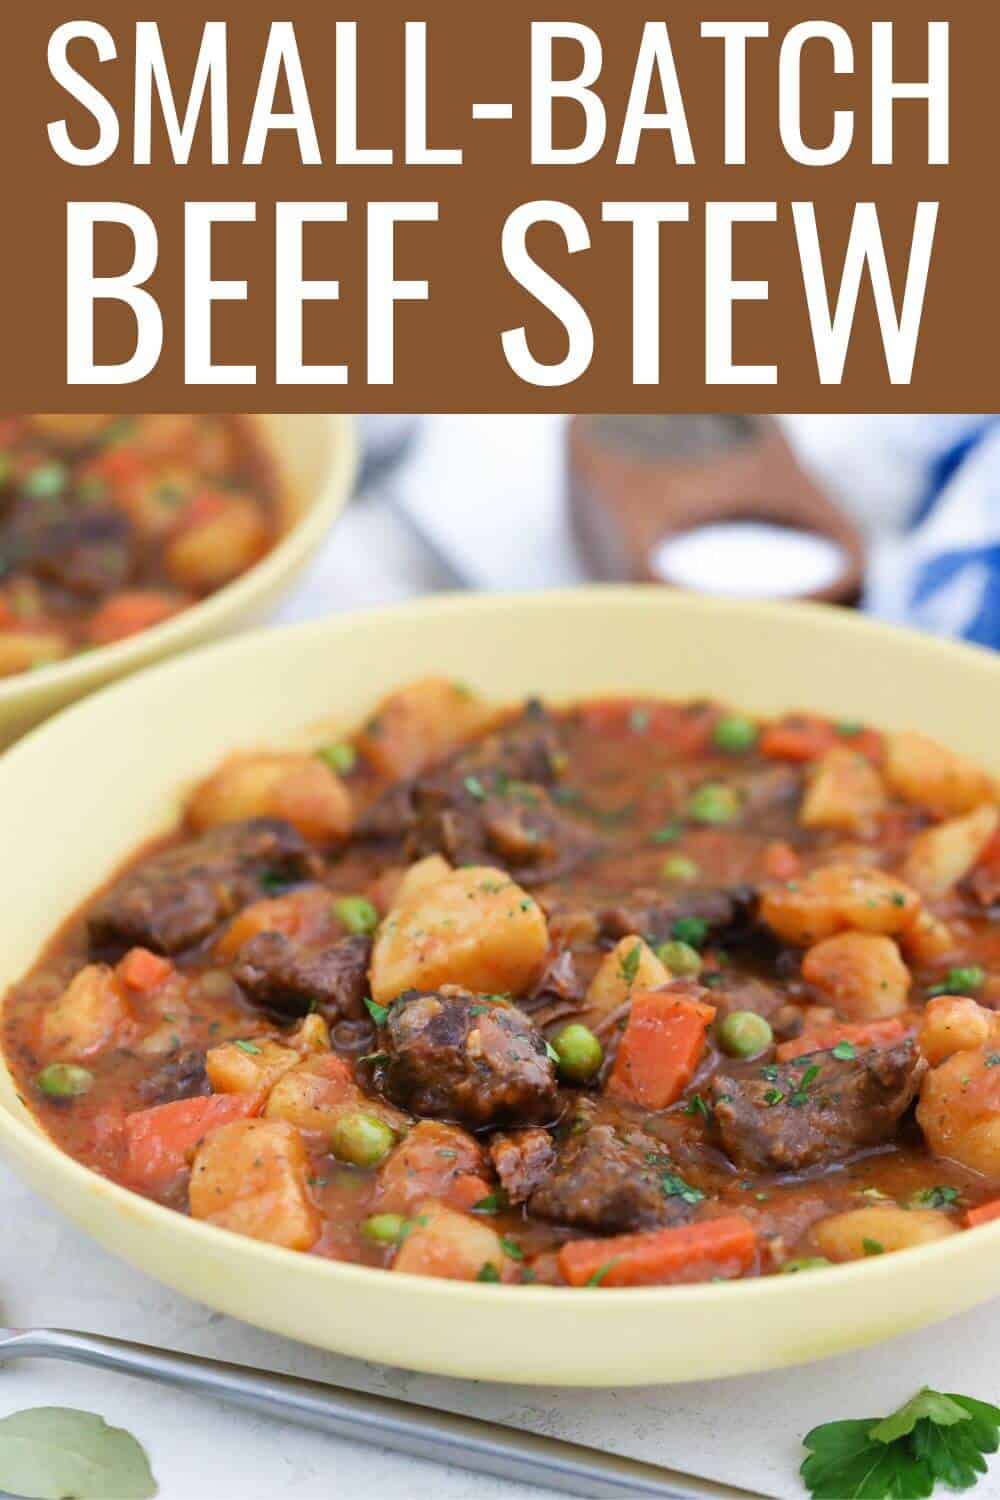 Small-batch beef stew final shot with recipe title text overlay.